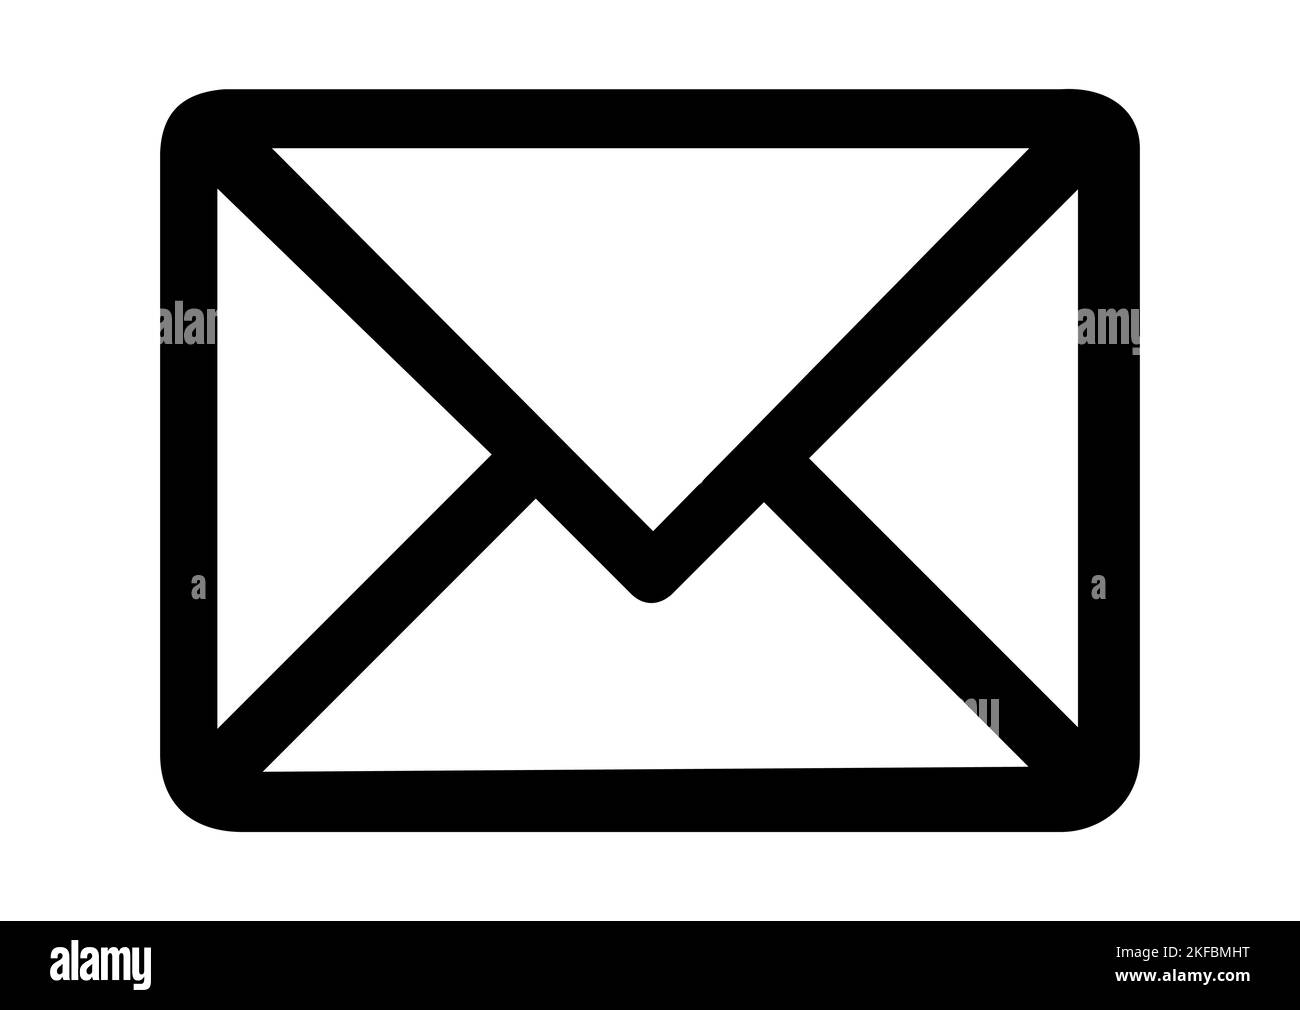 MAIL LETTER ENVELOPE ICON, ISOLATED PICTOGRAM Stock Vector